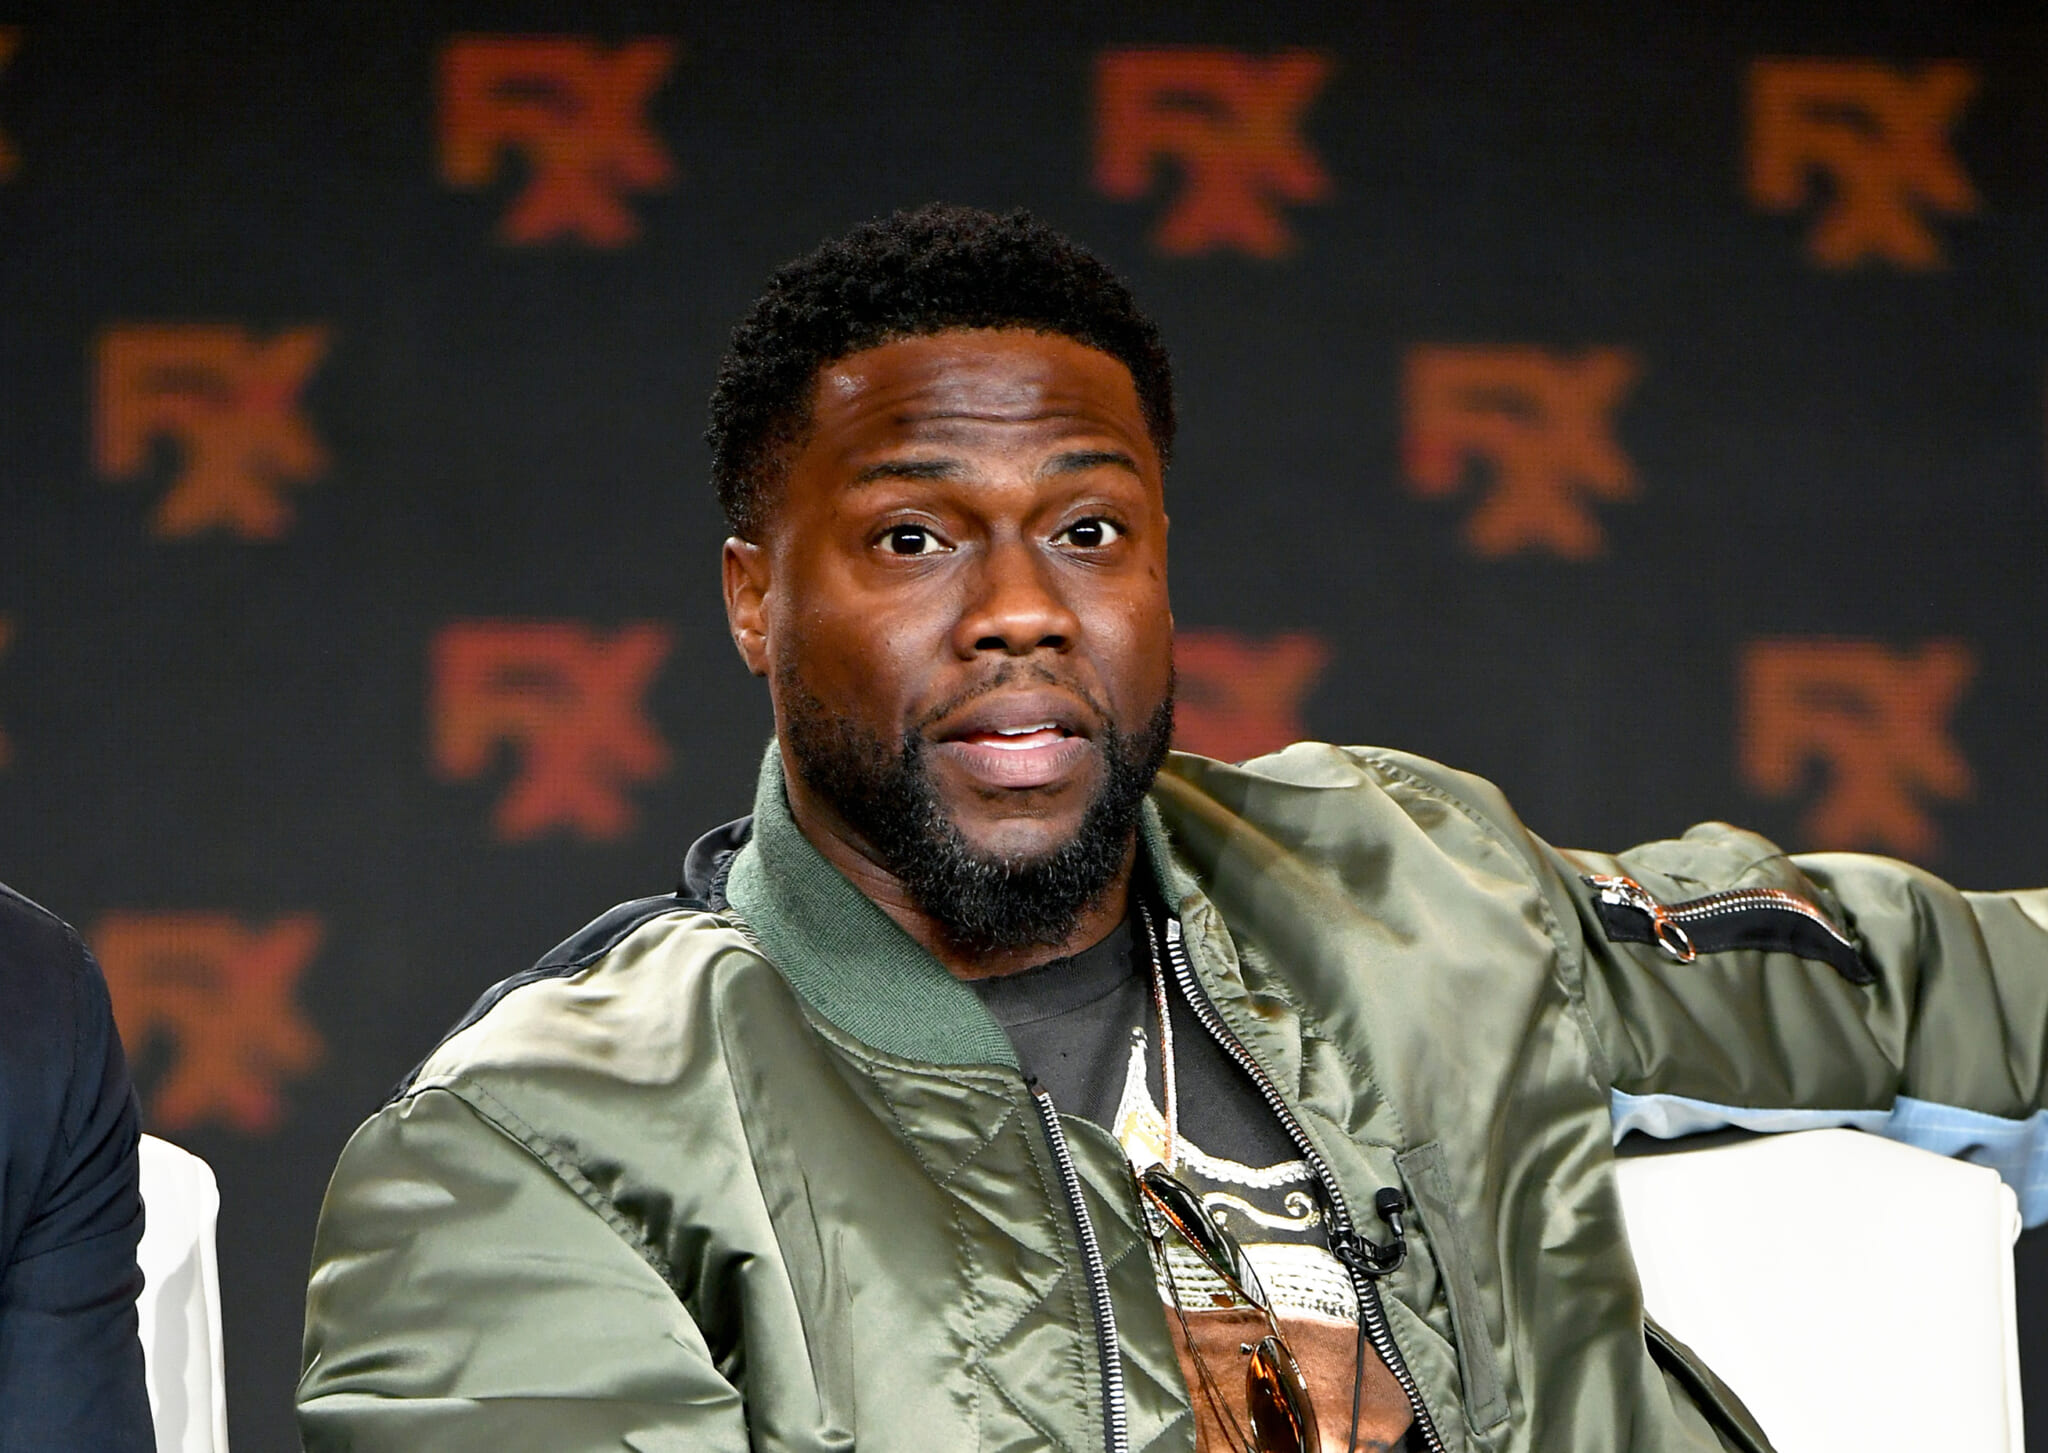 Kevin Hart to debut SiriusXM podcast with Seinfeld as guest LaptrinhX